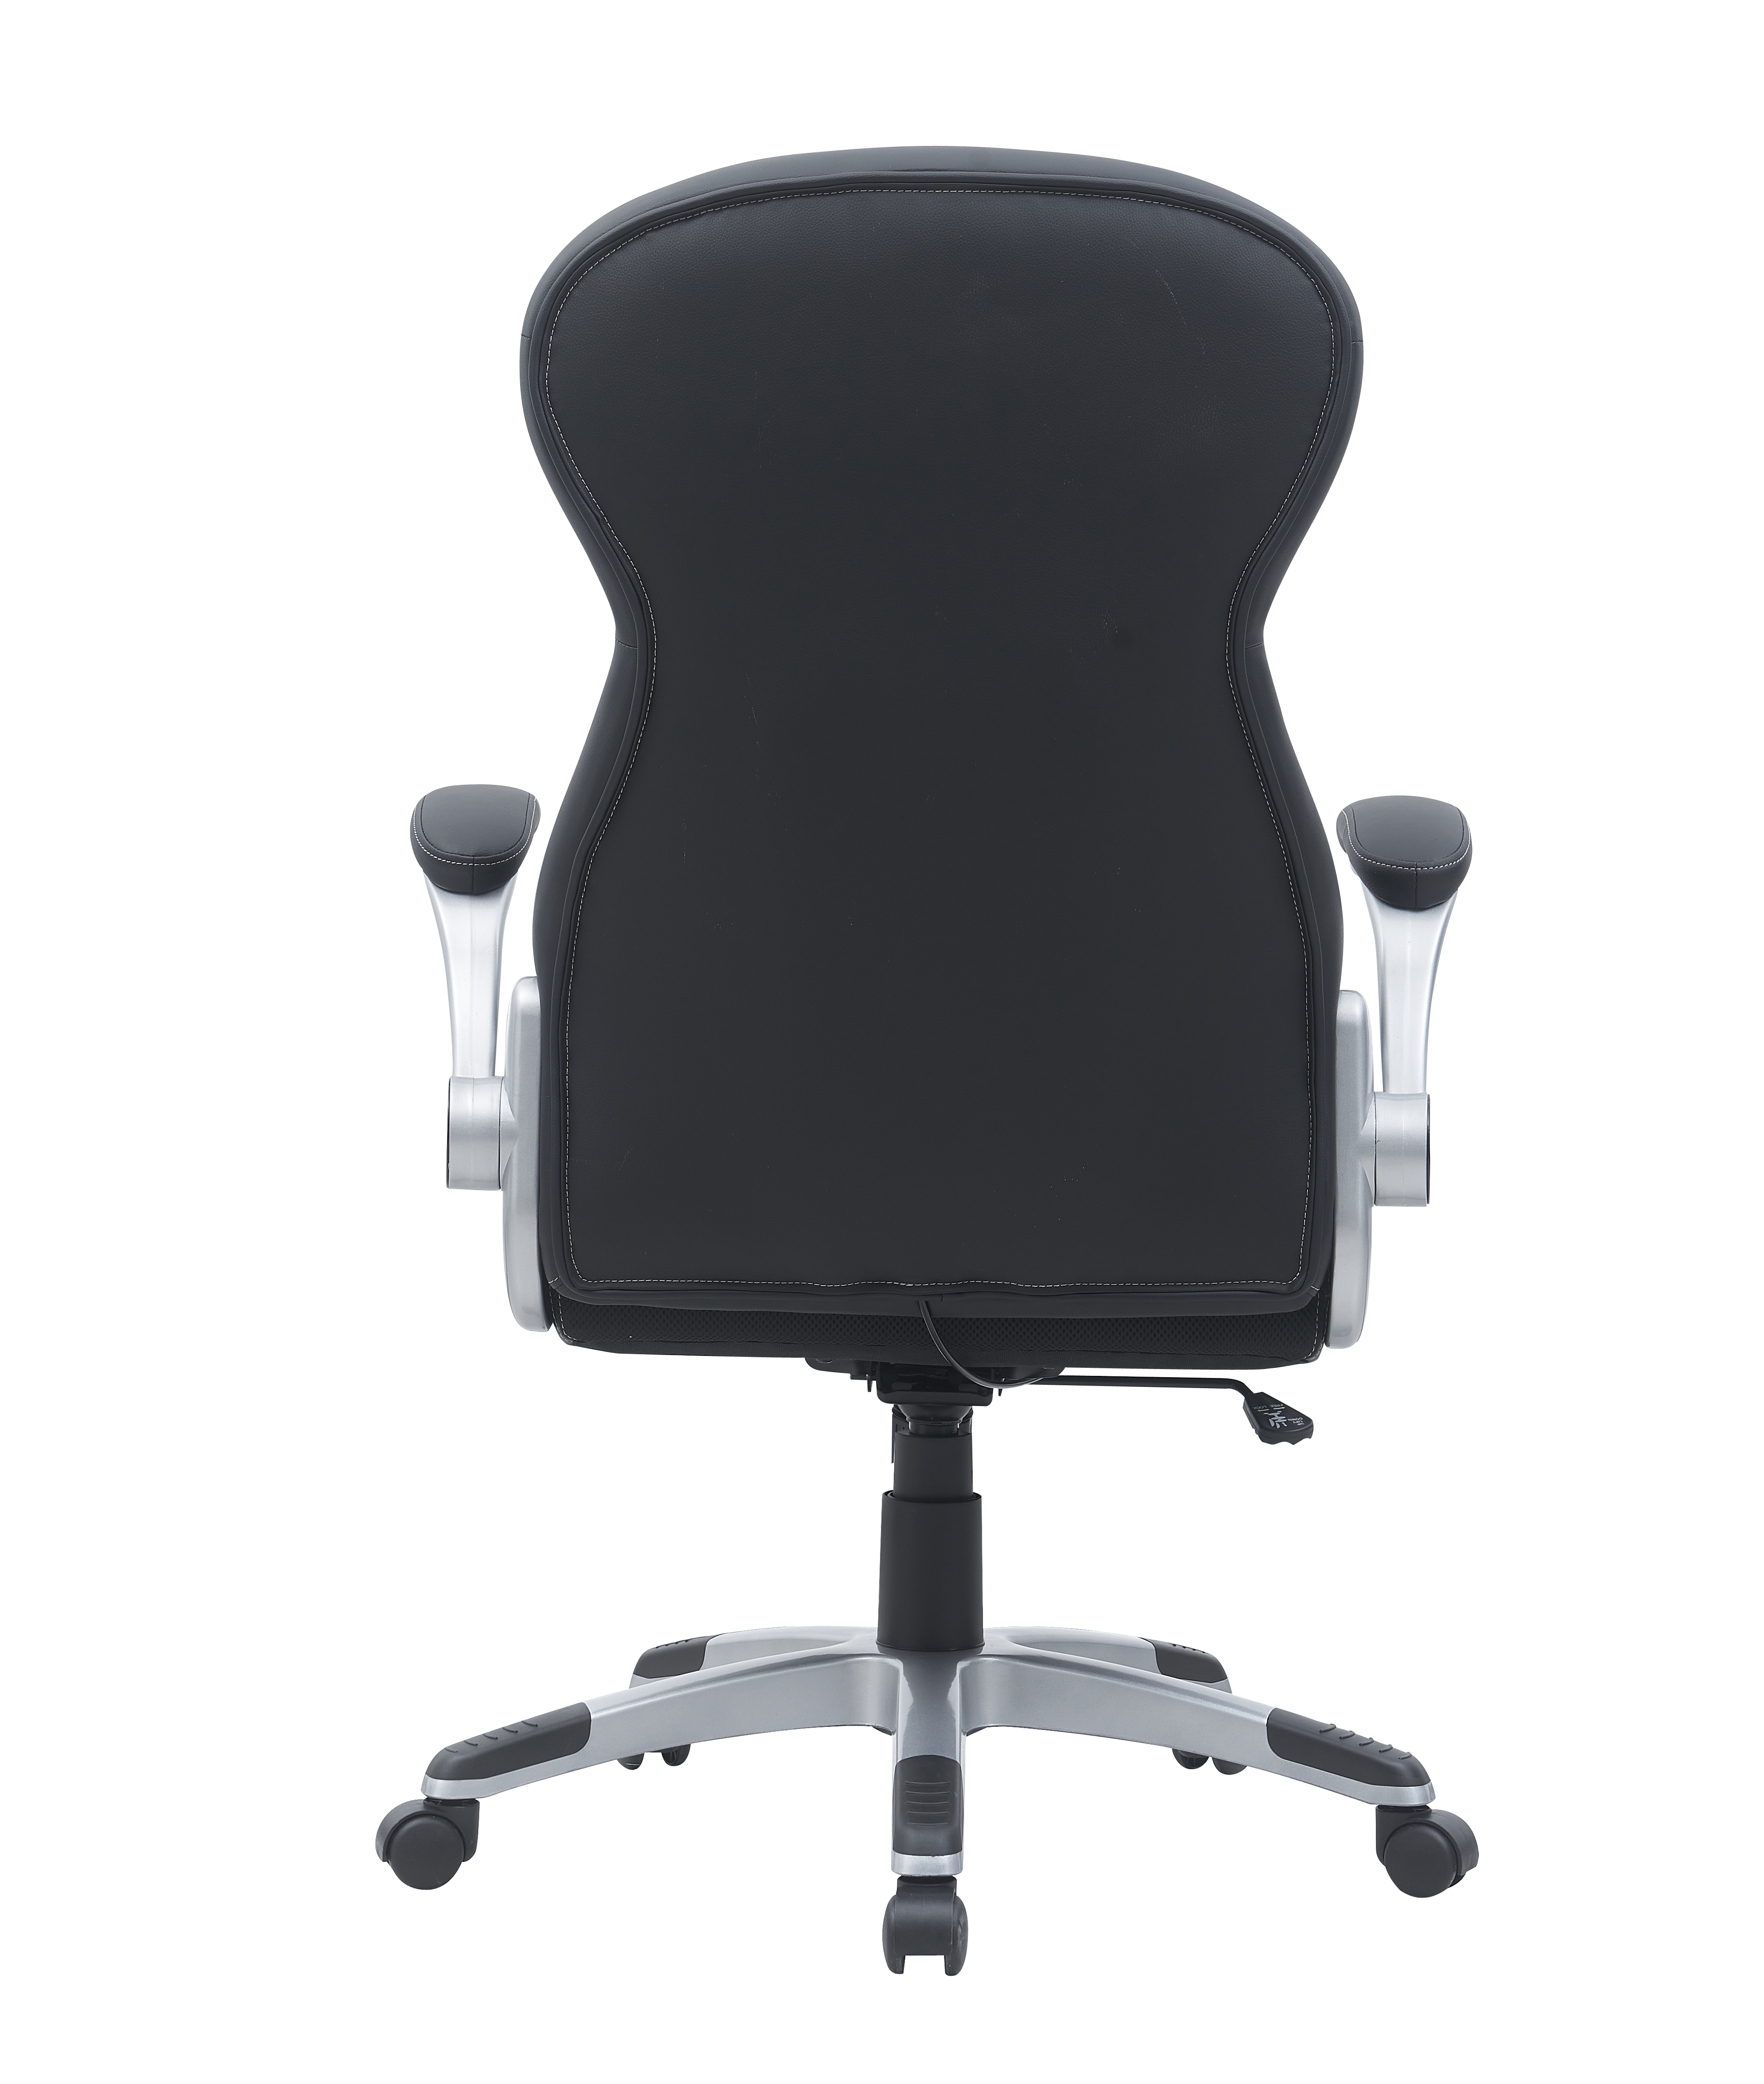 Executive Office Chair with Flip-Up Arms High Back Desk Chair PU Leather Chair with Lumbar Support